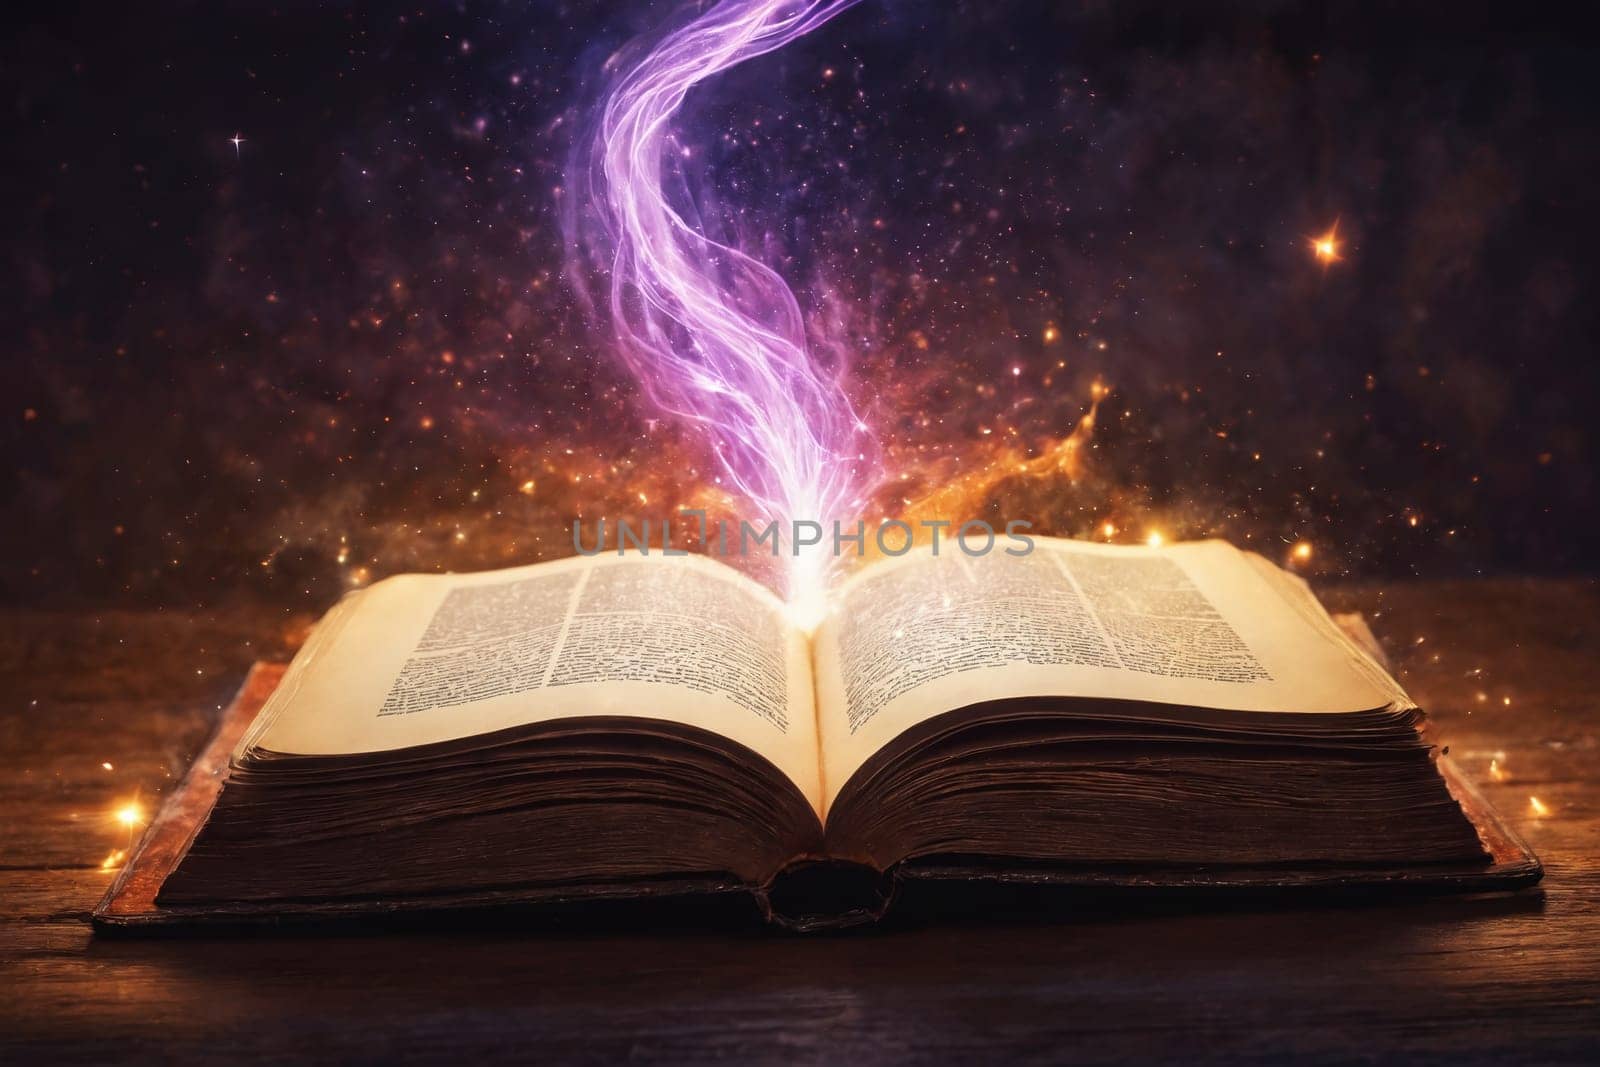 Magical Emission From an Open Book by Andre1ns